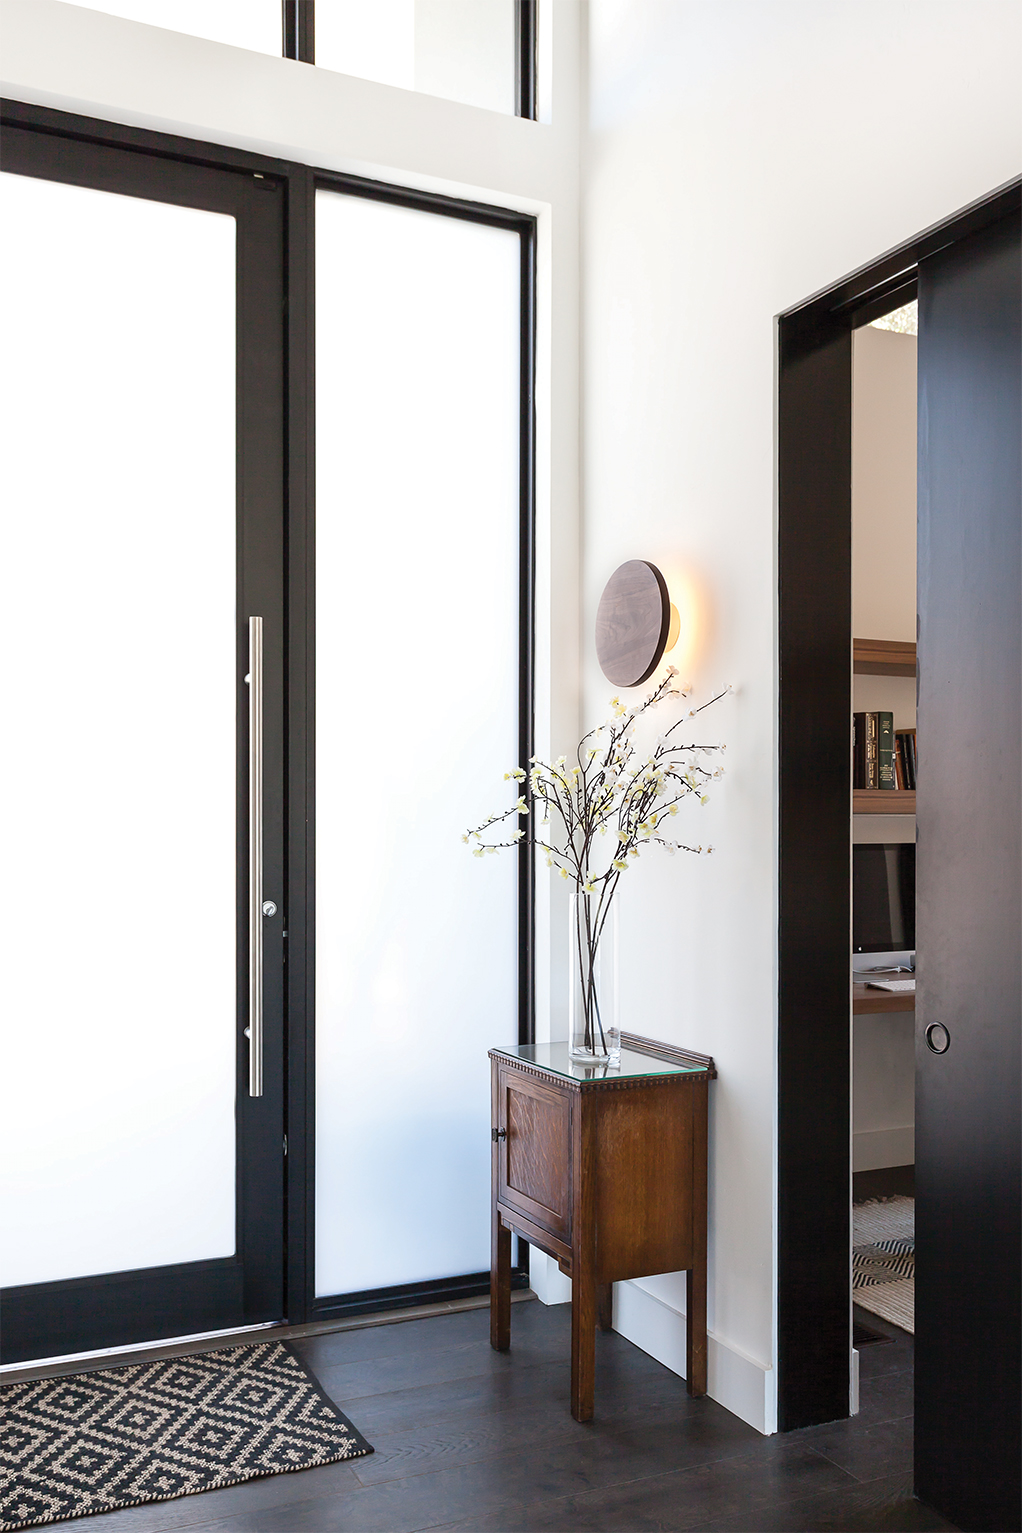 The home’s entryway features RBW’s Radient Wall Sconce. All photos © Kat Alves Photography.